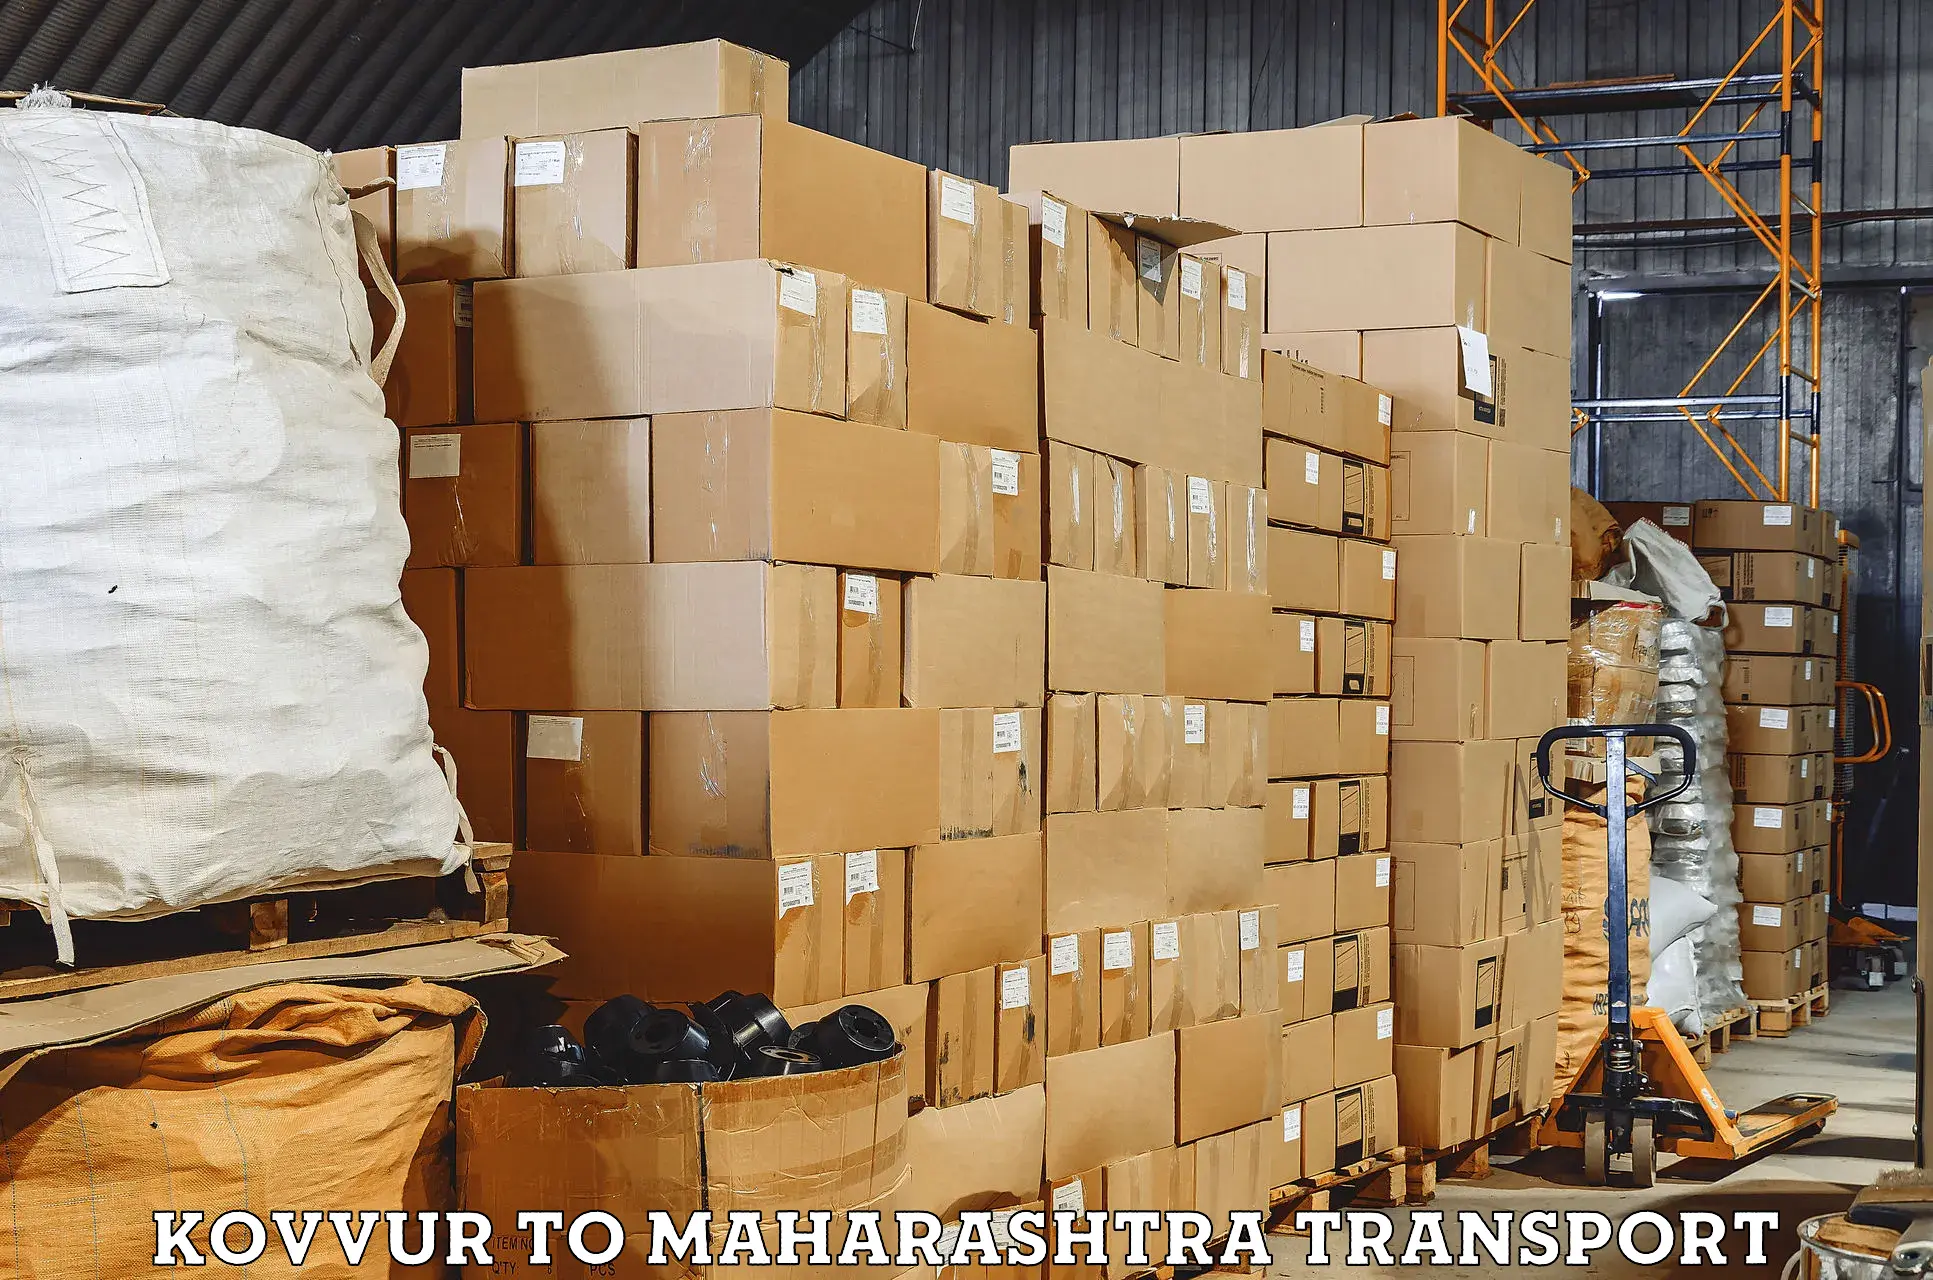 Part load transport service in India Kovvur to Kalbadevi